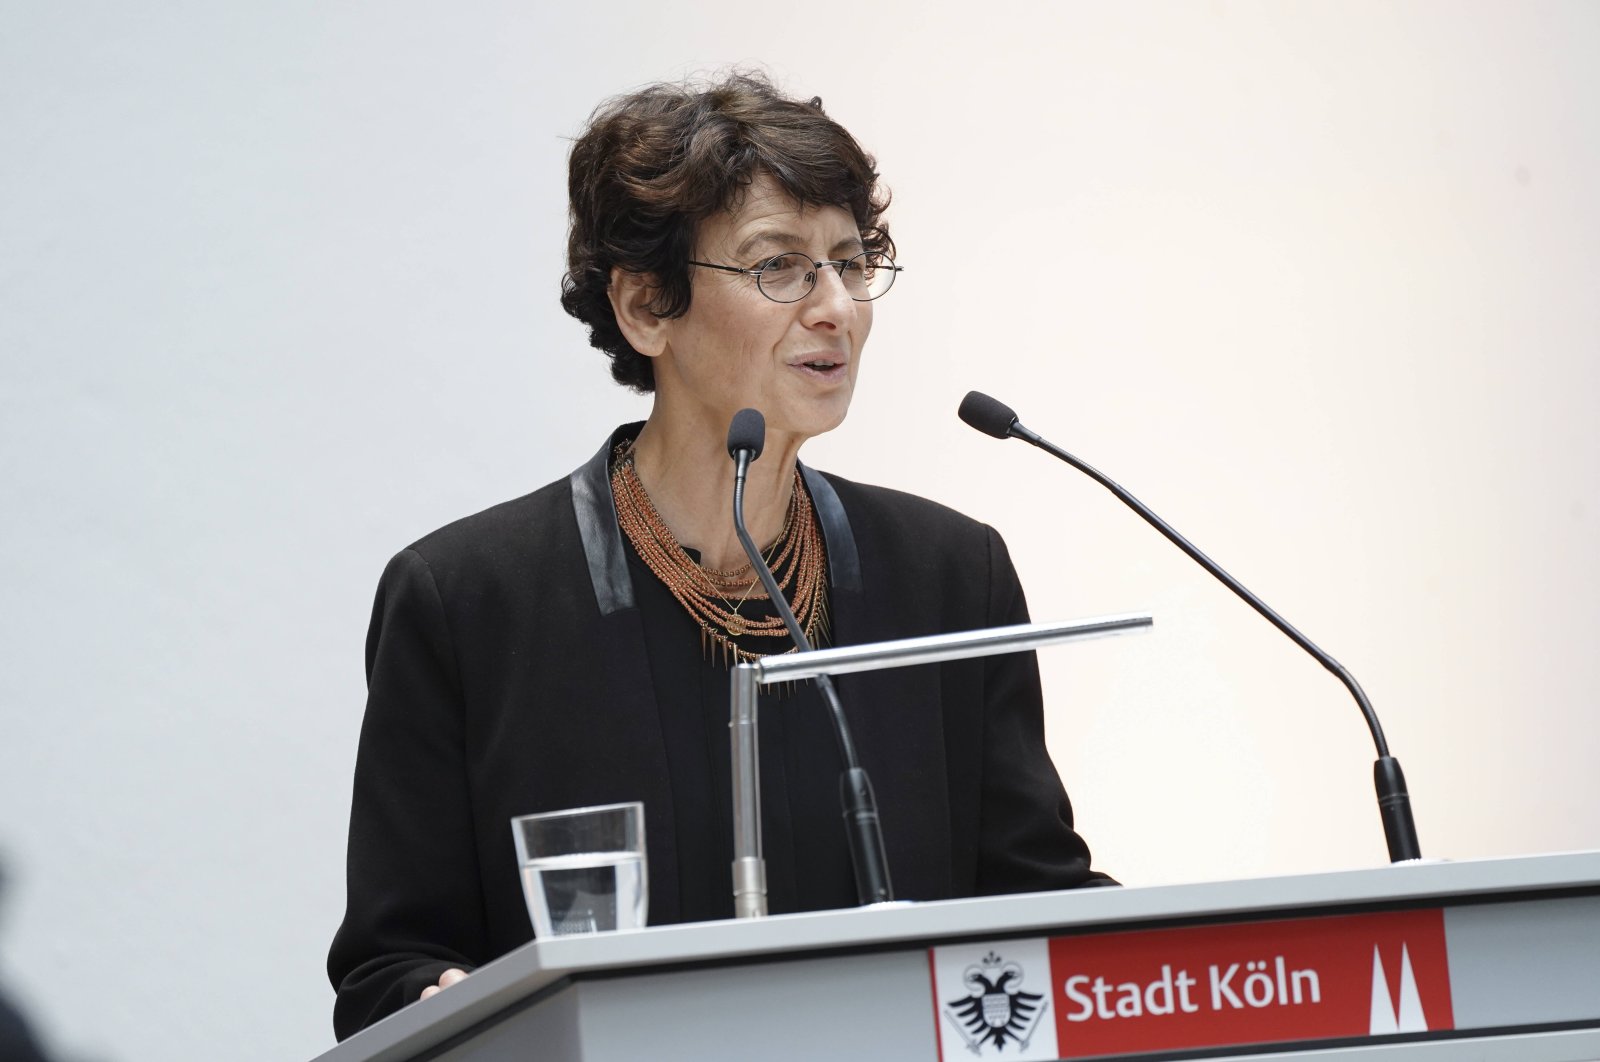 BioNTech co-founder Özlem Türeci speaks during an honorary doctorate ceremony in Germany's Köln on Sept. 17, 2021 (Reuters Photo)